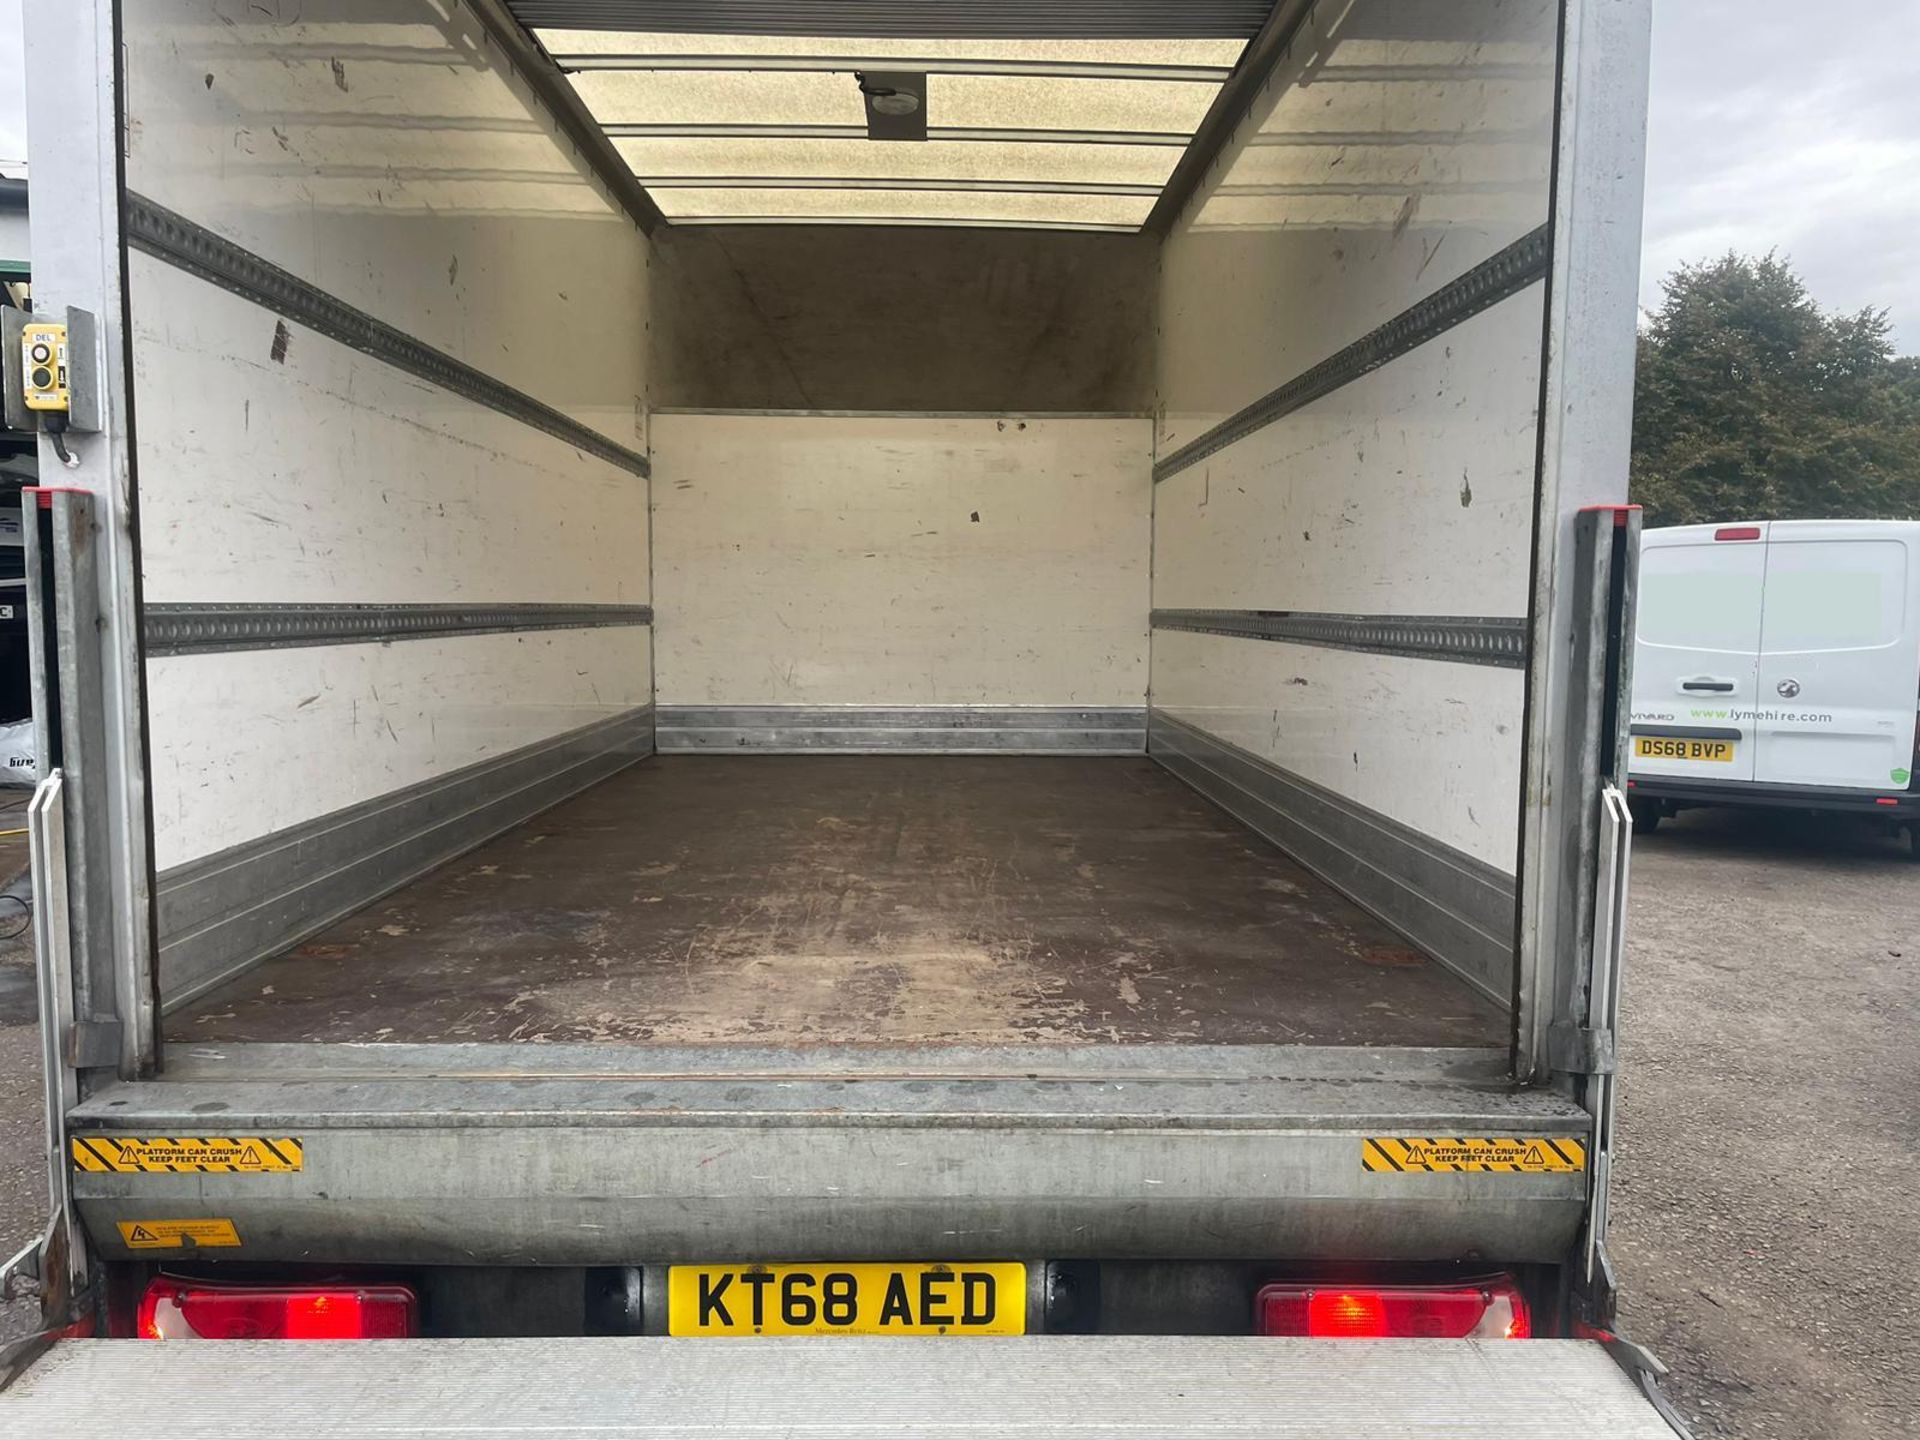 2018 MERCEDES SPRINTER 314 CDTI LUTON WITH TAIL LIFT - 108,356 WARRANTED MILES - 2.2 EURO 6 ENGINE, - Image 4 of 10